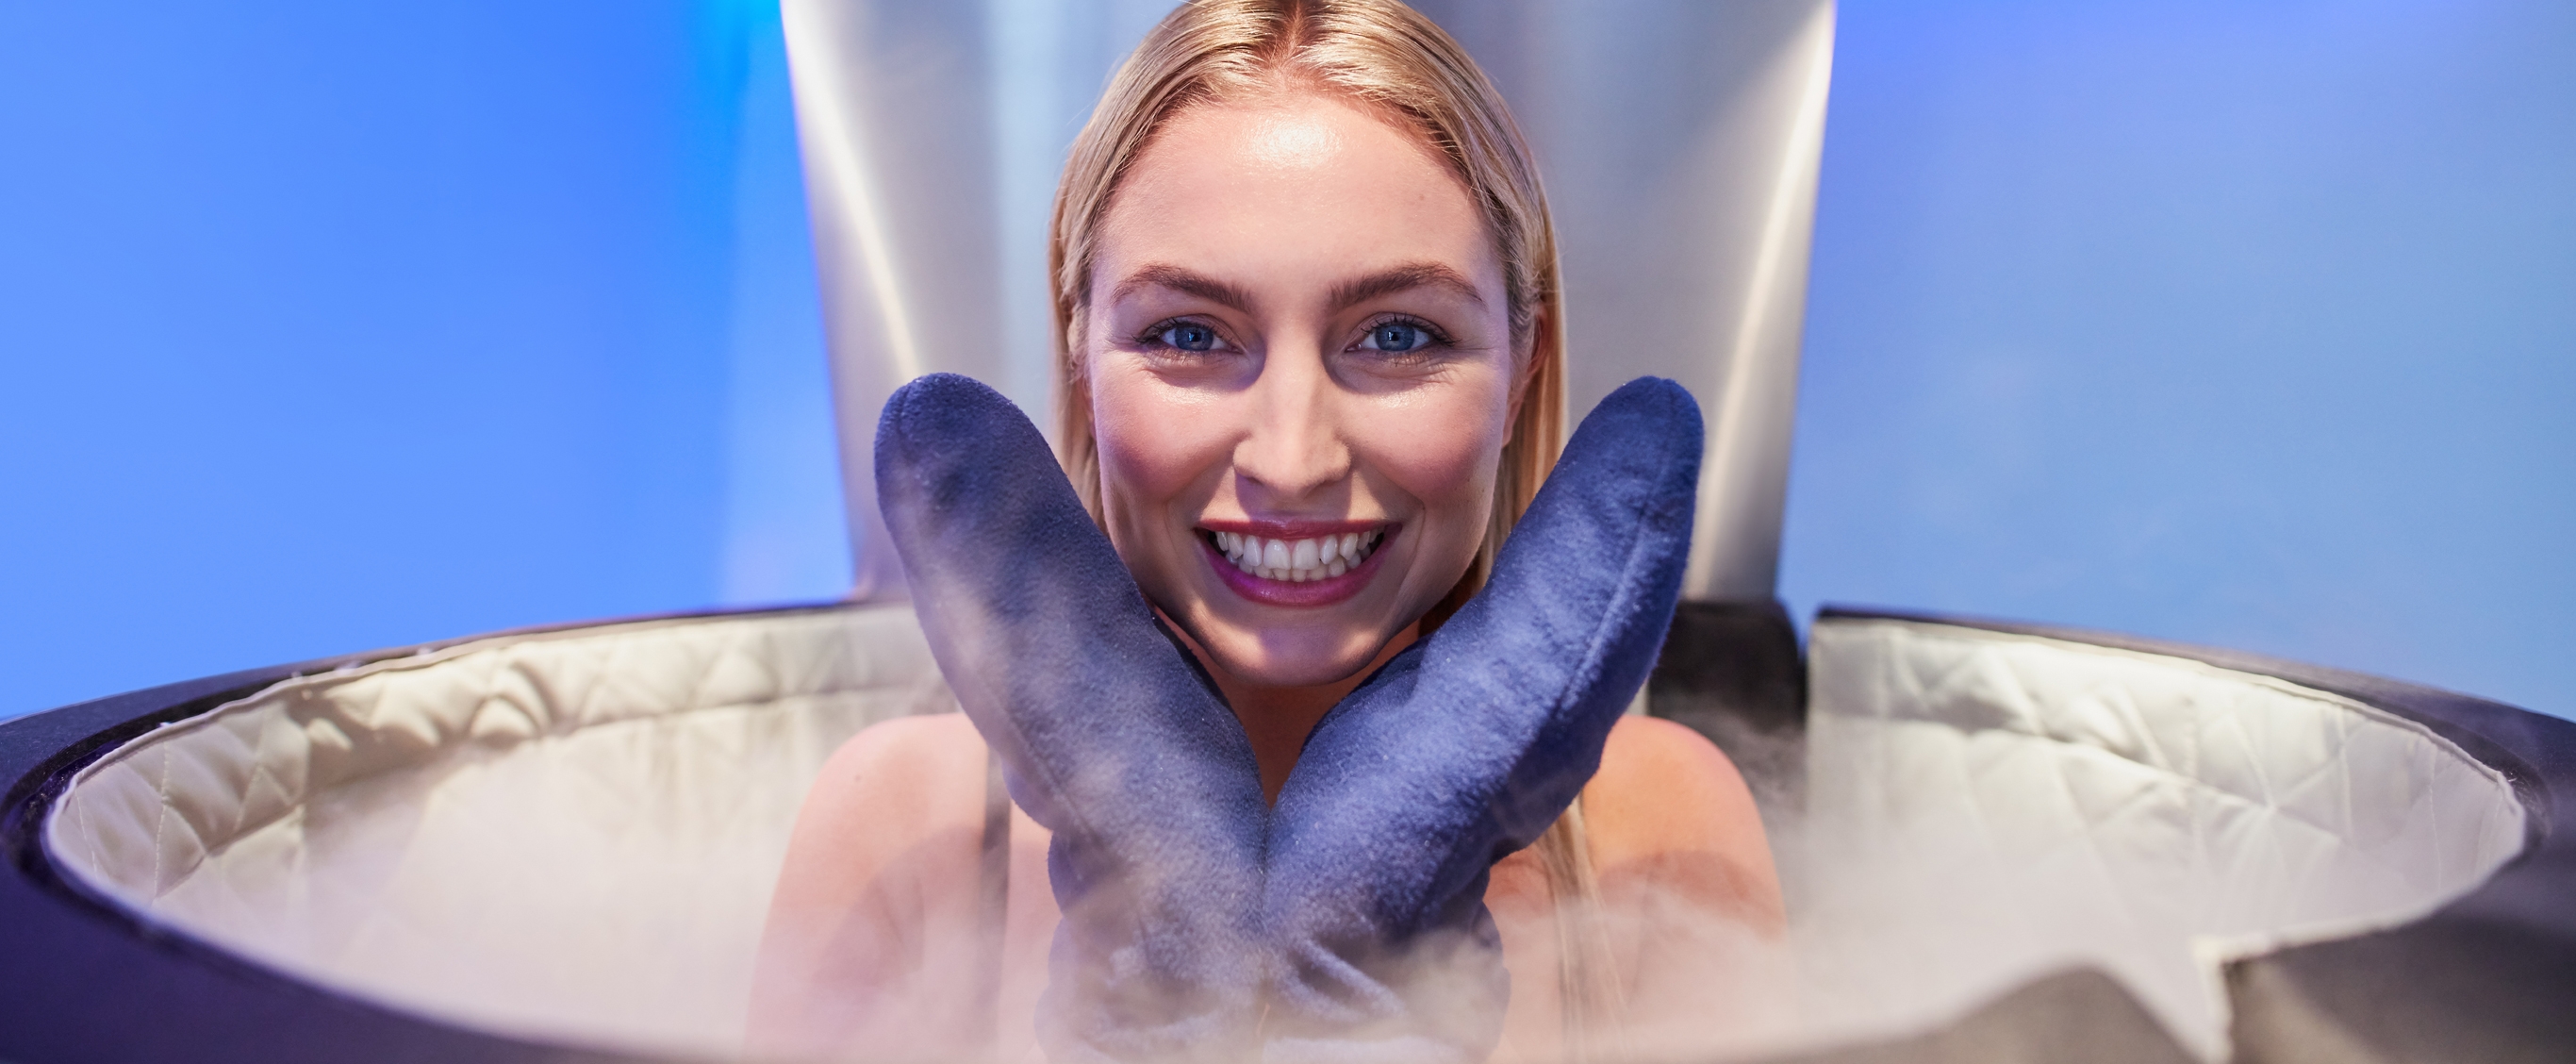 Cryotherapy –  a new hype service